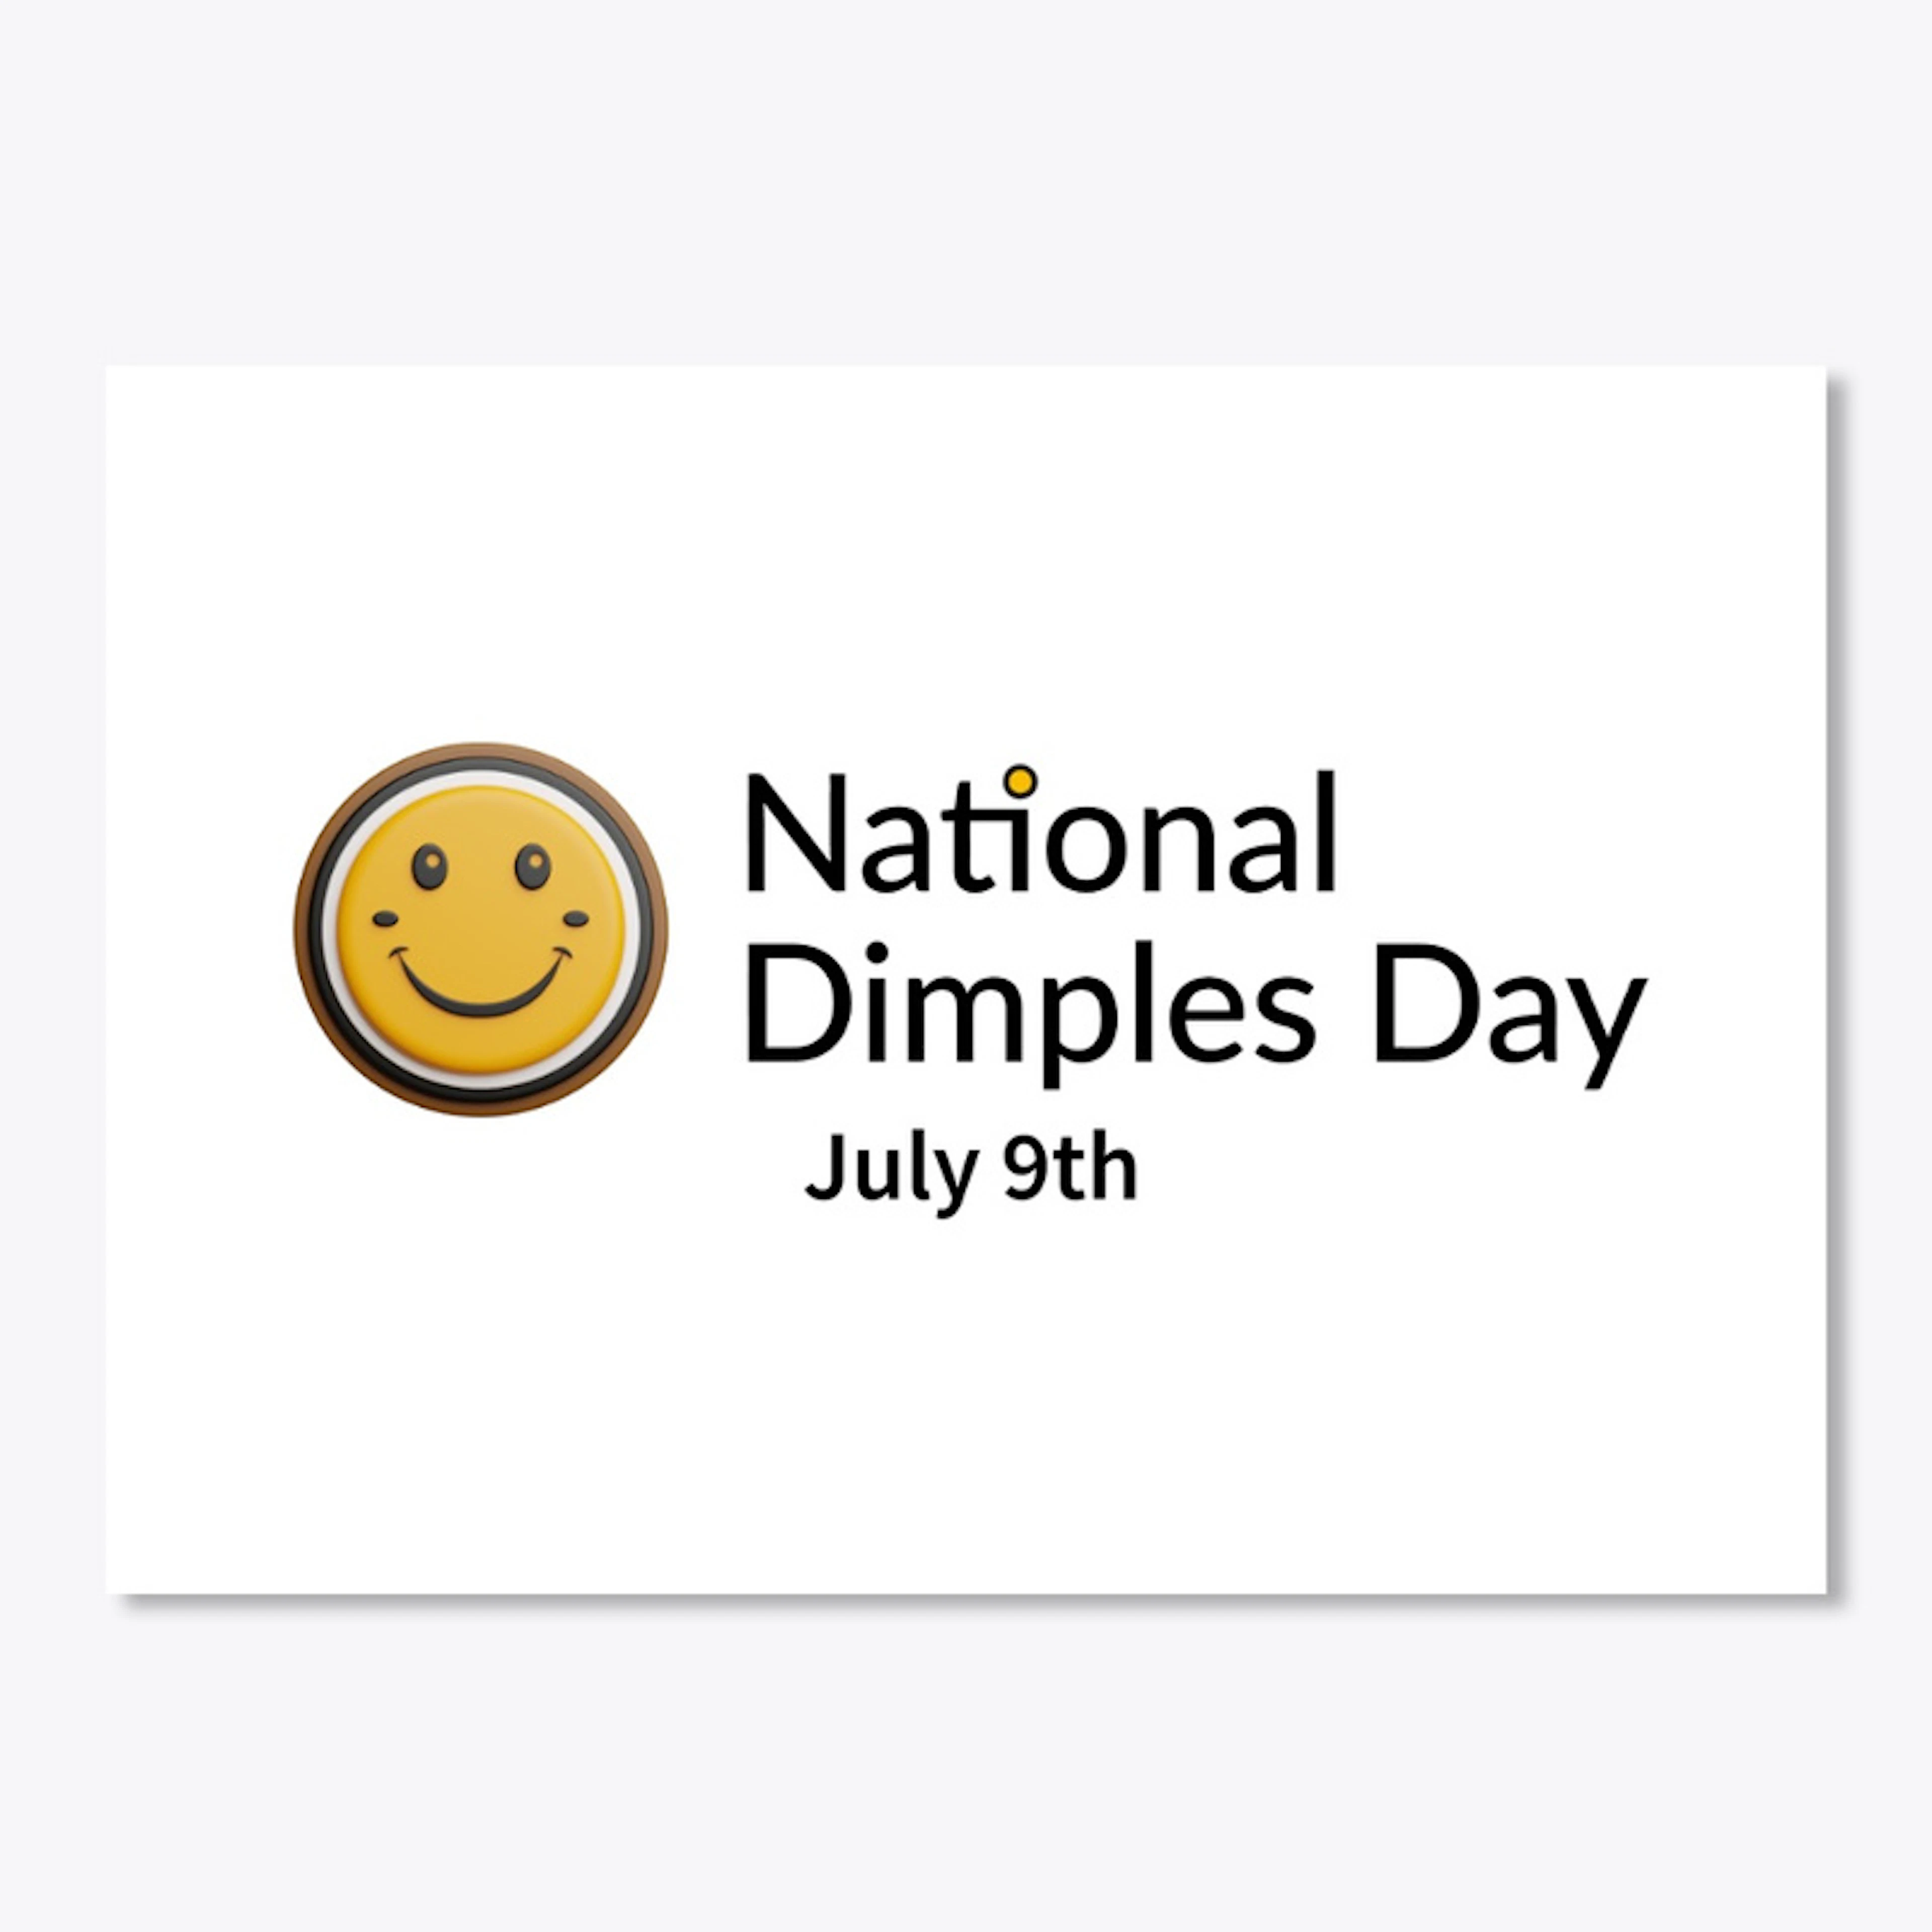 National Dimples Day